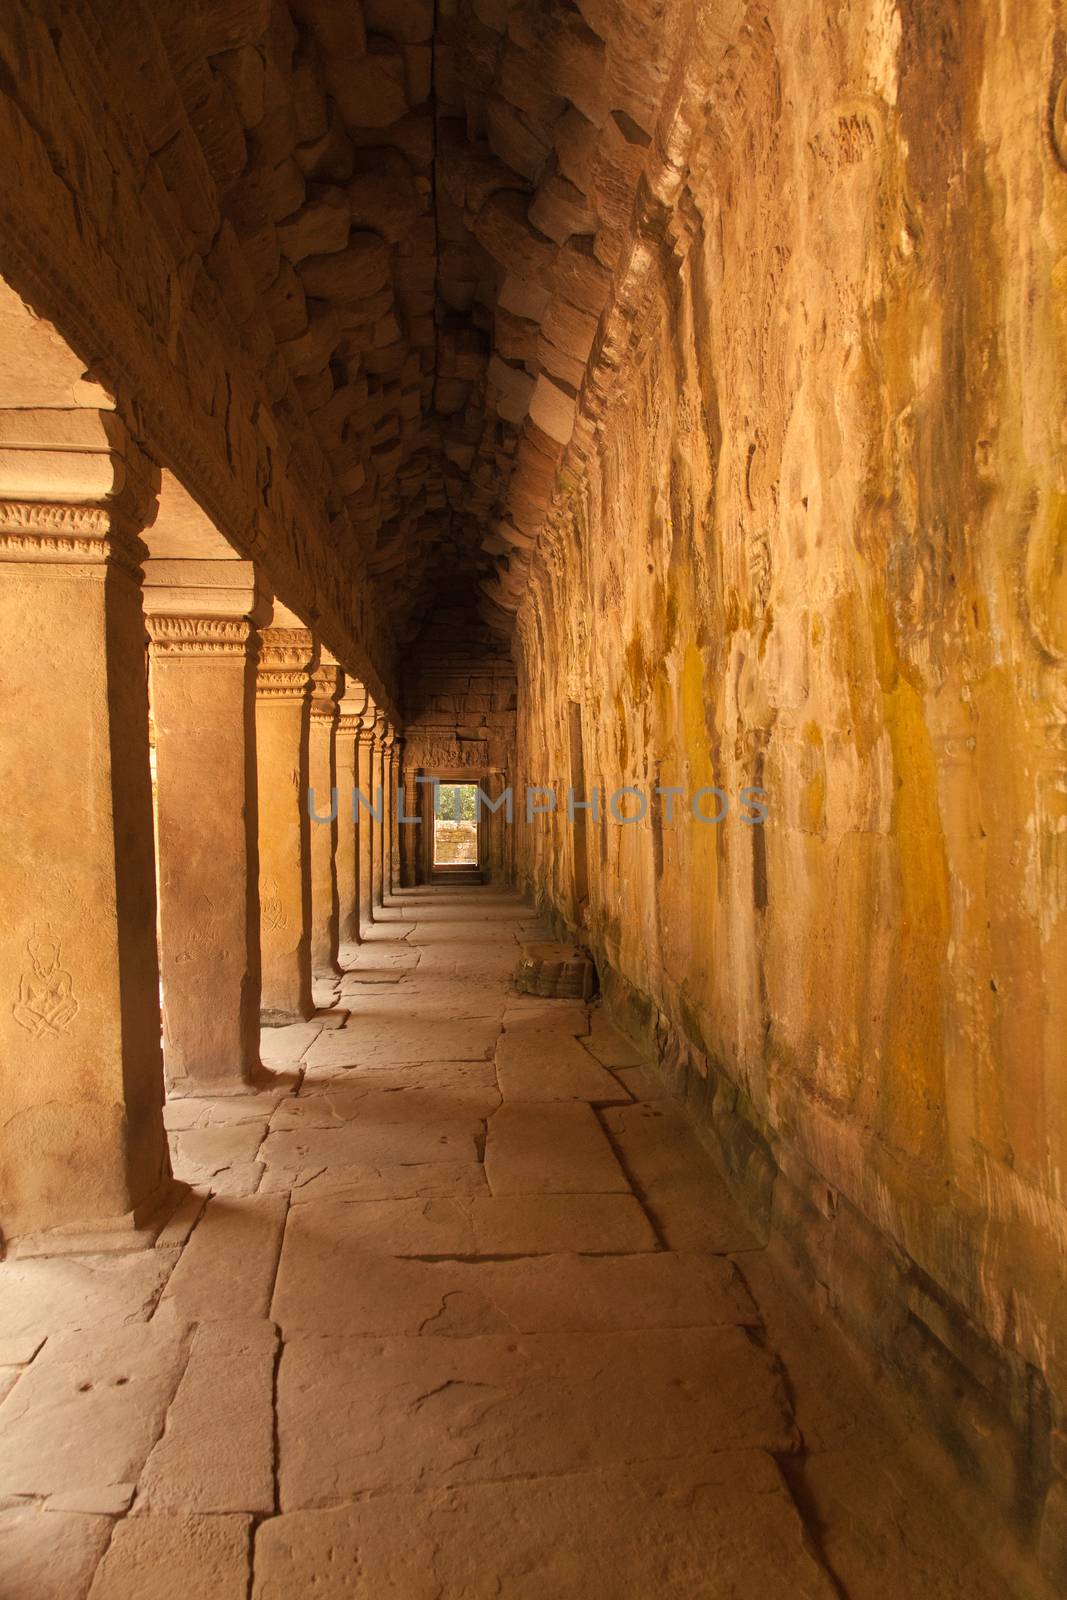 The temple complex of Angkor Watt, Cambodia, with the famous temples of Angkor, Ta Prohm and Bayon. Passageway with repeating arches. Warm golden light with ancient stonework.High quality photo